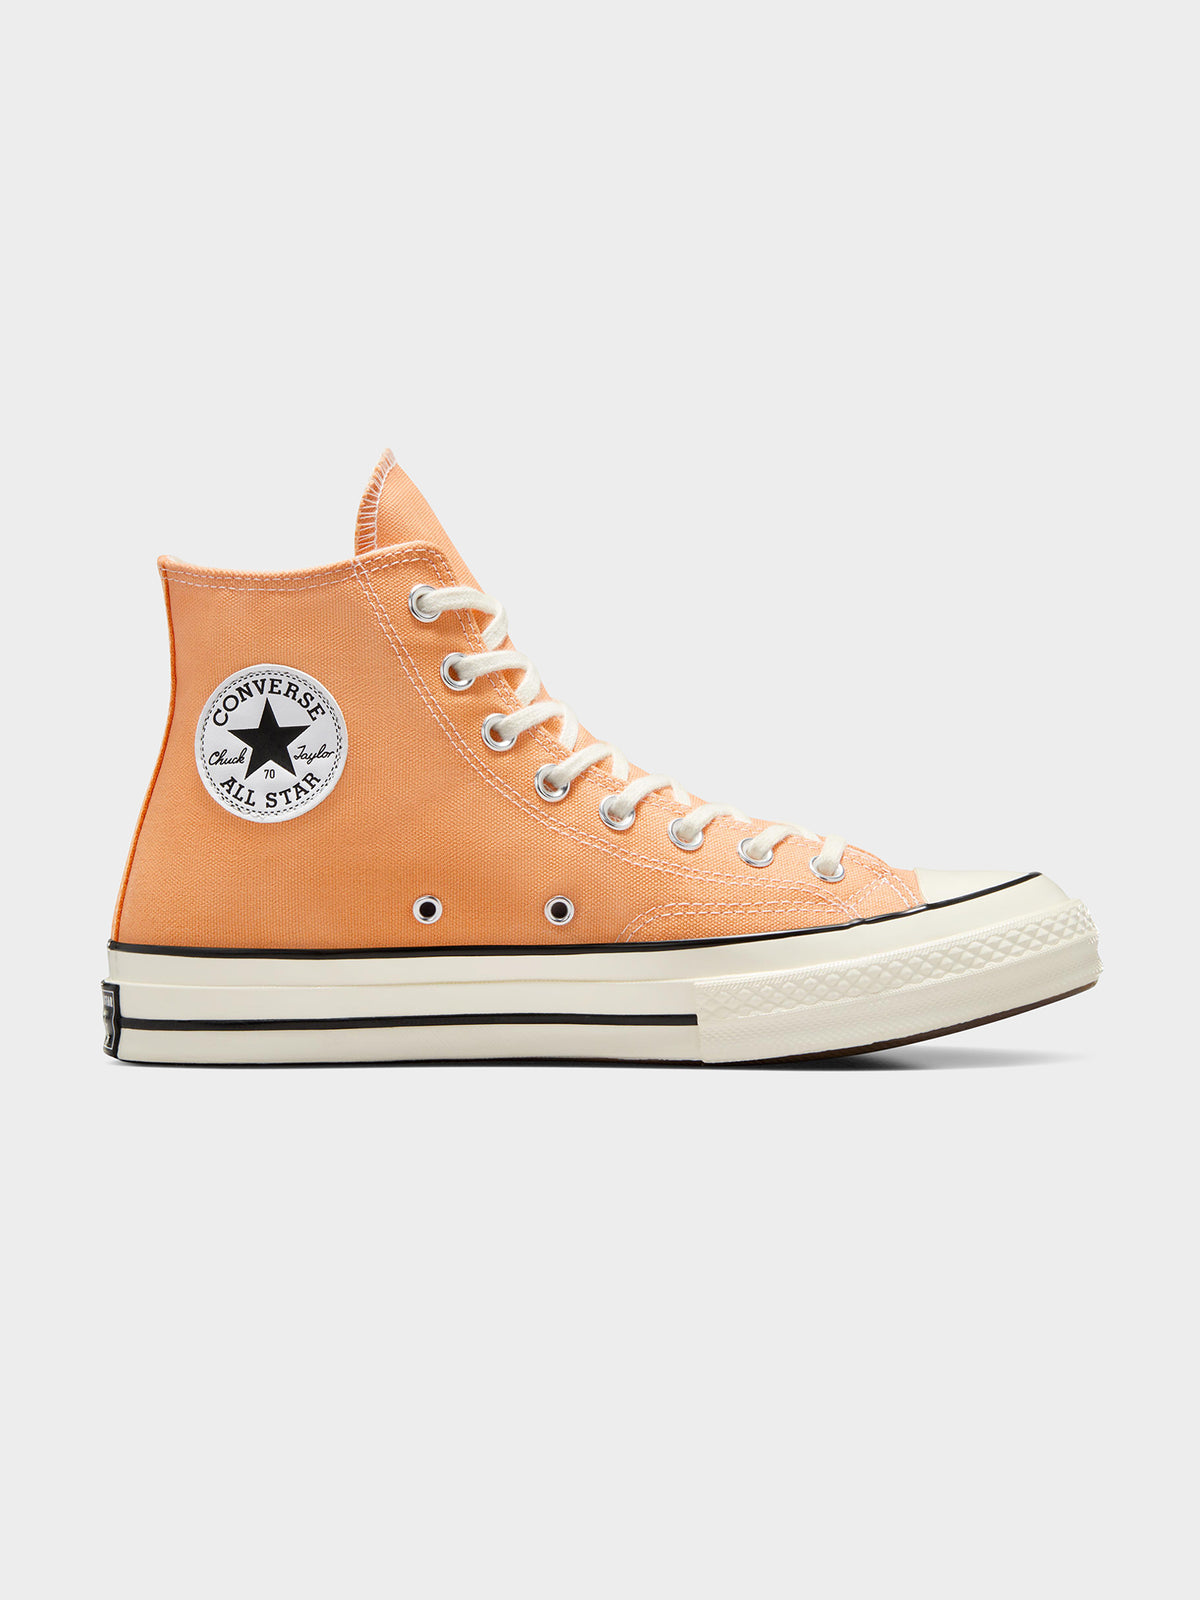 Unisex Converse Chuck 70 Vintage Canvas High Top Sneakers in Tiger Moth